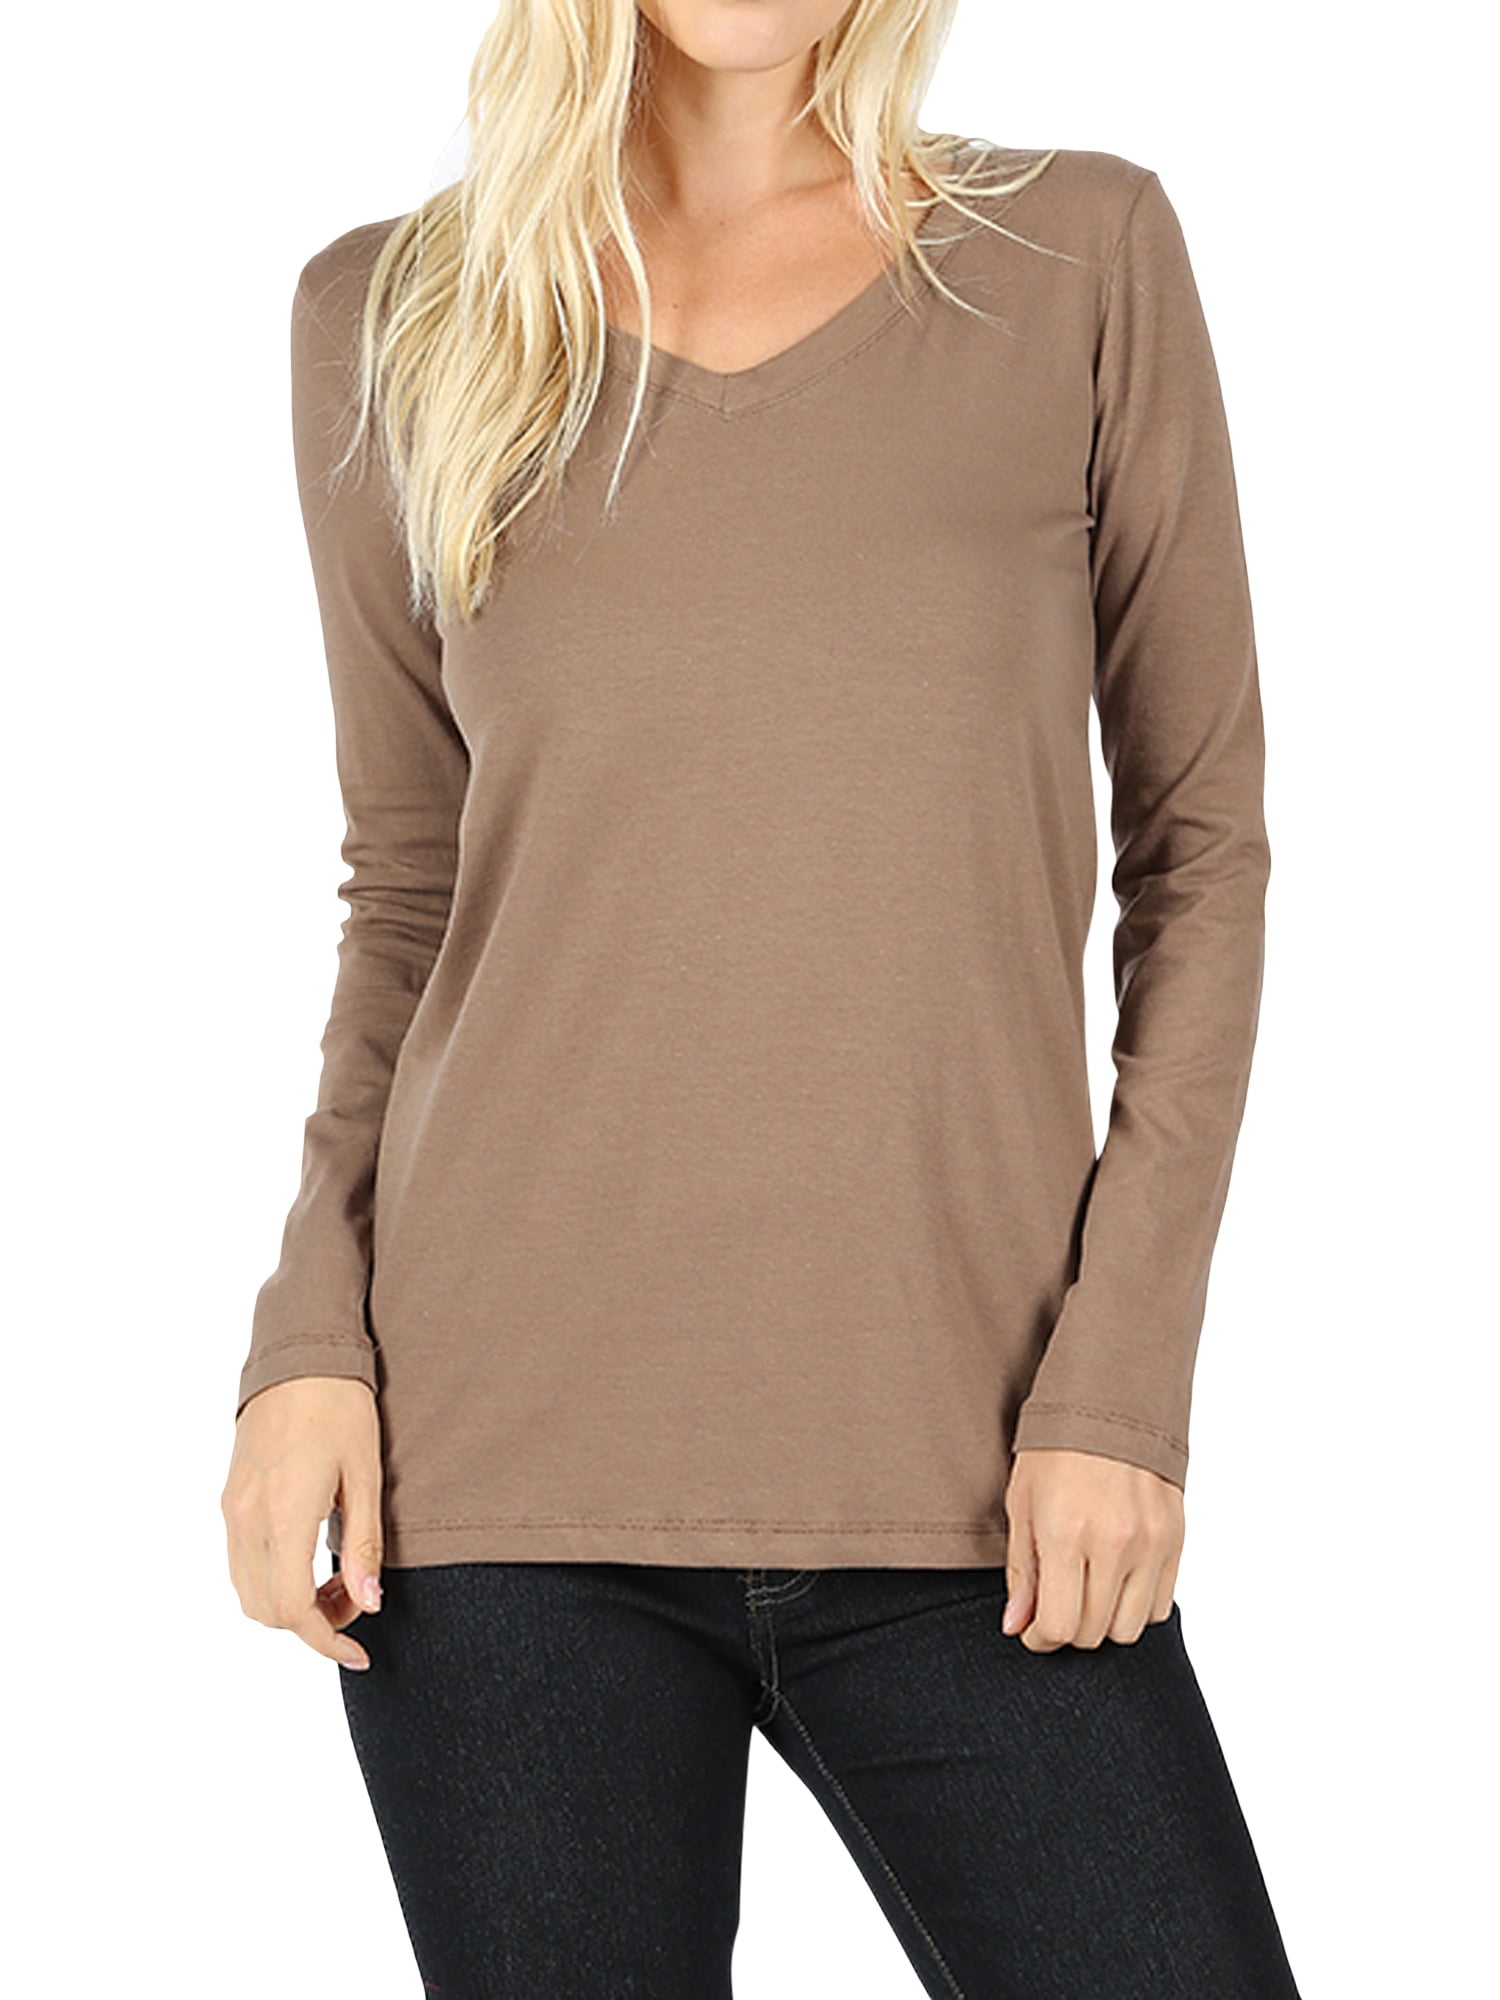 Women Casual Basic Cotton Loose Fit V-Neck Long Sleeve T-Shirt Top